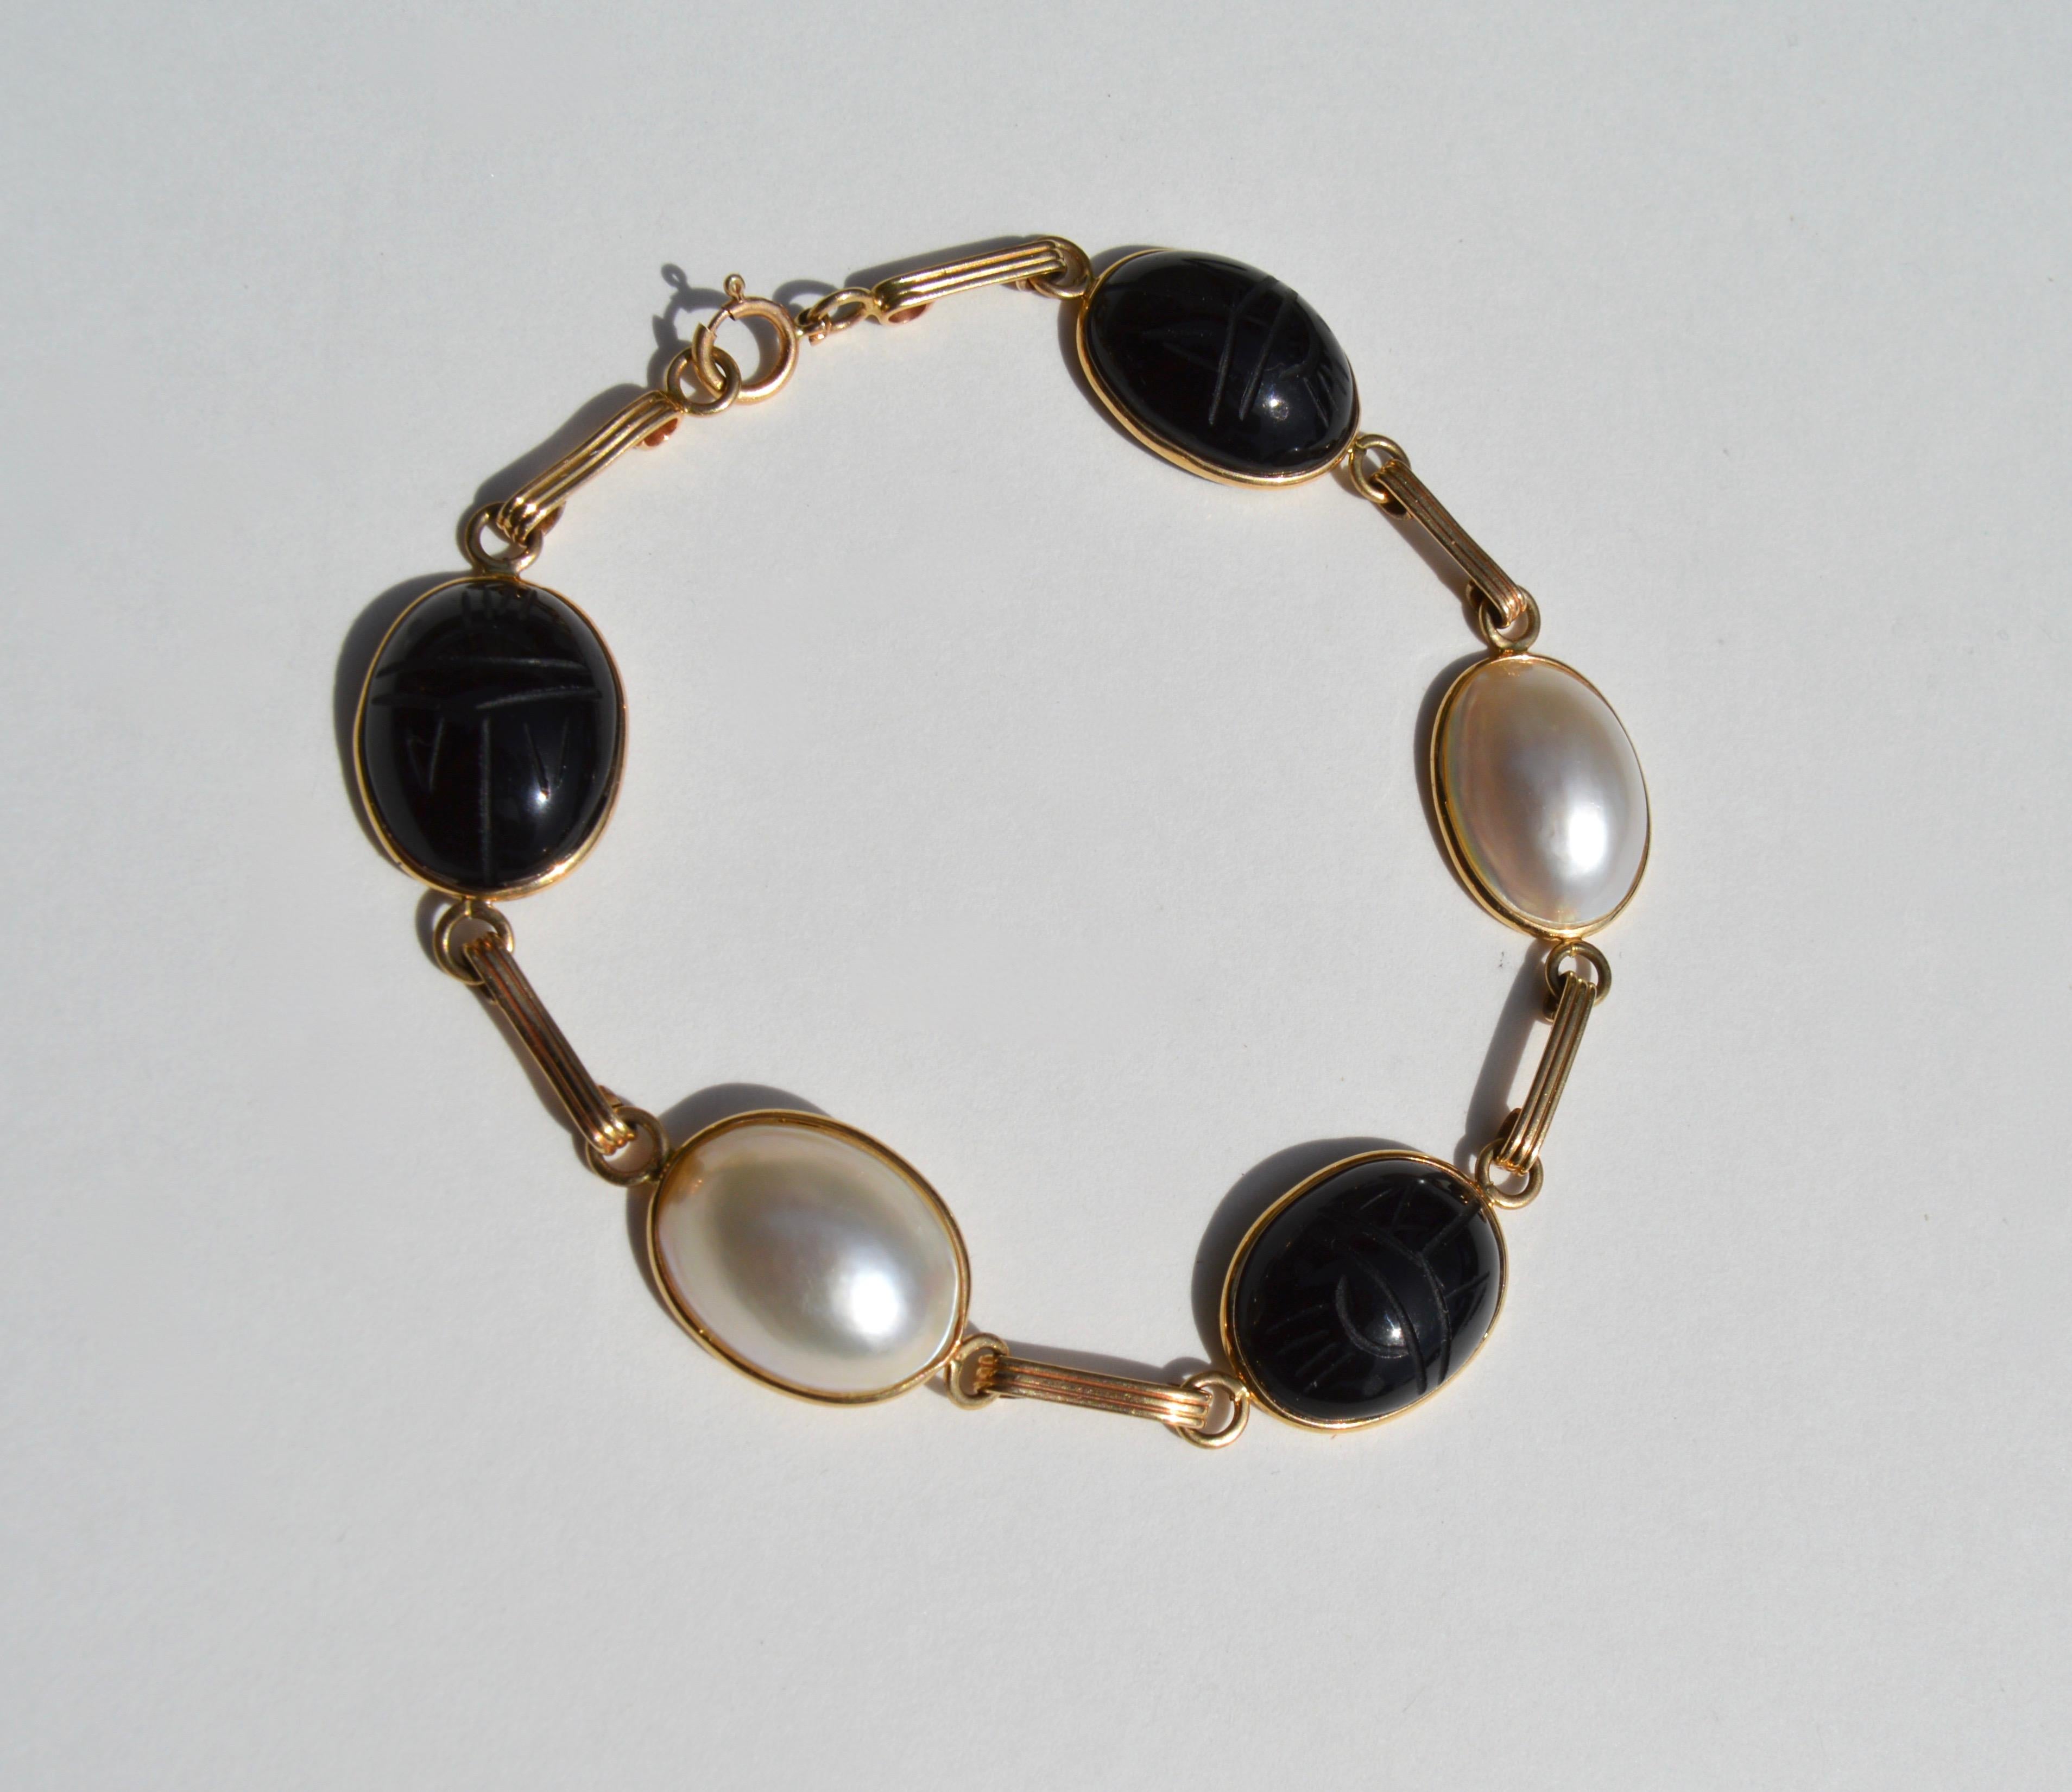 Beautiful vintage midcentury era circa 1960s Egyptian revival 14K yellow gold with mother of pearl and hand carved onyx scarab beetles. In very good condition. Bracelet measures 7